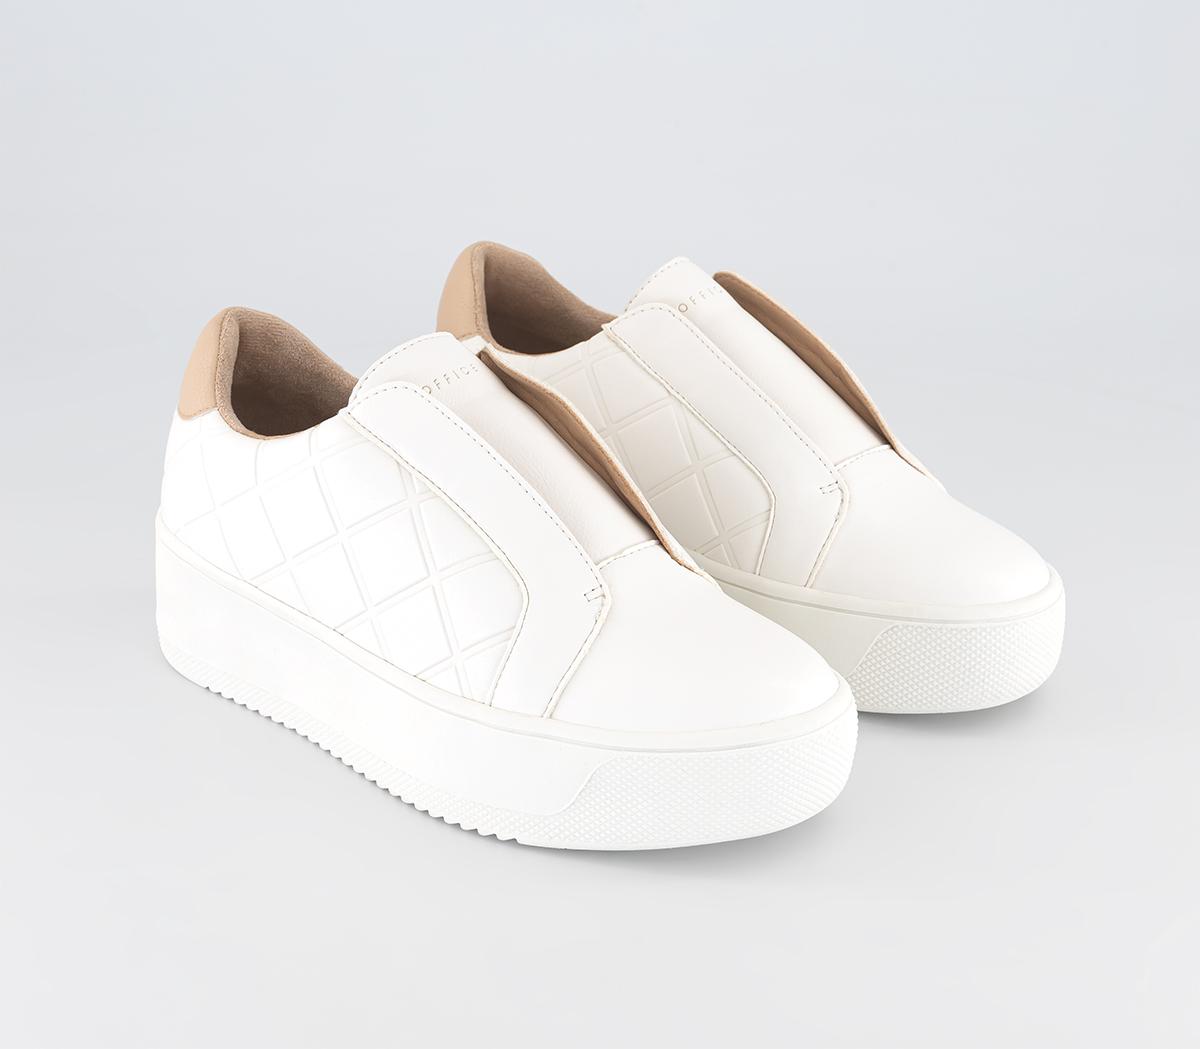 OFFICE Fancy Quilted Slip On Trainers White - Women's Trainers